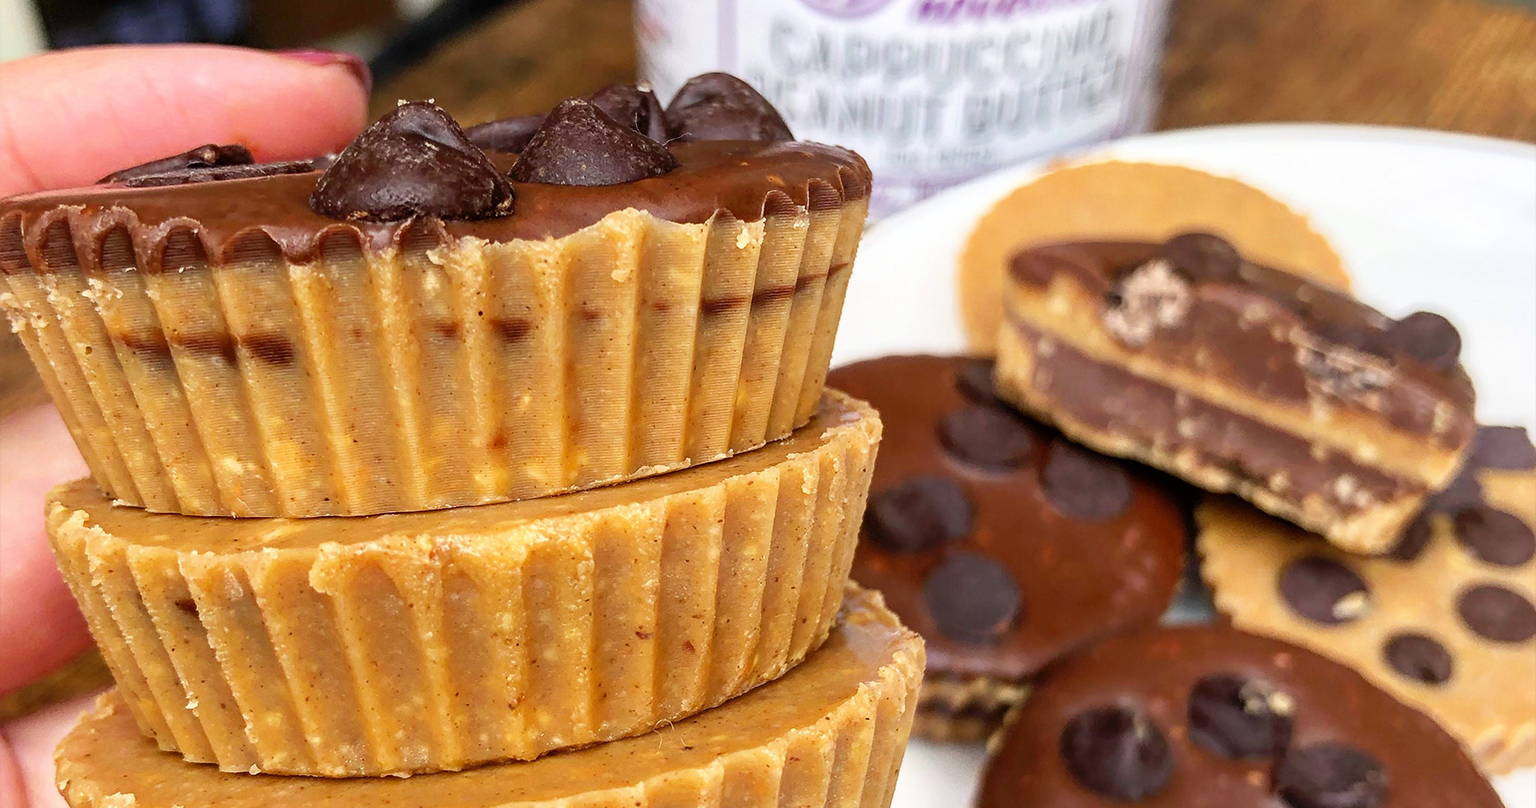 Peanut butter cups with chocolate chips